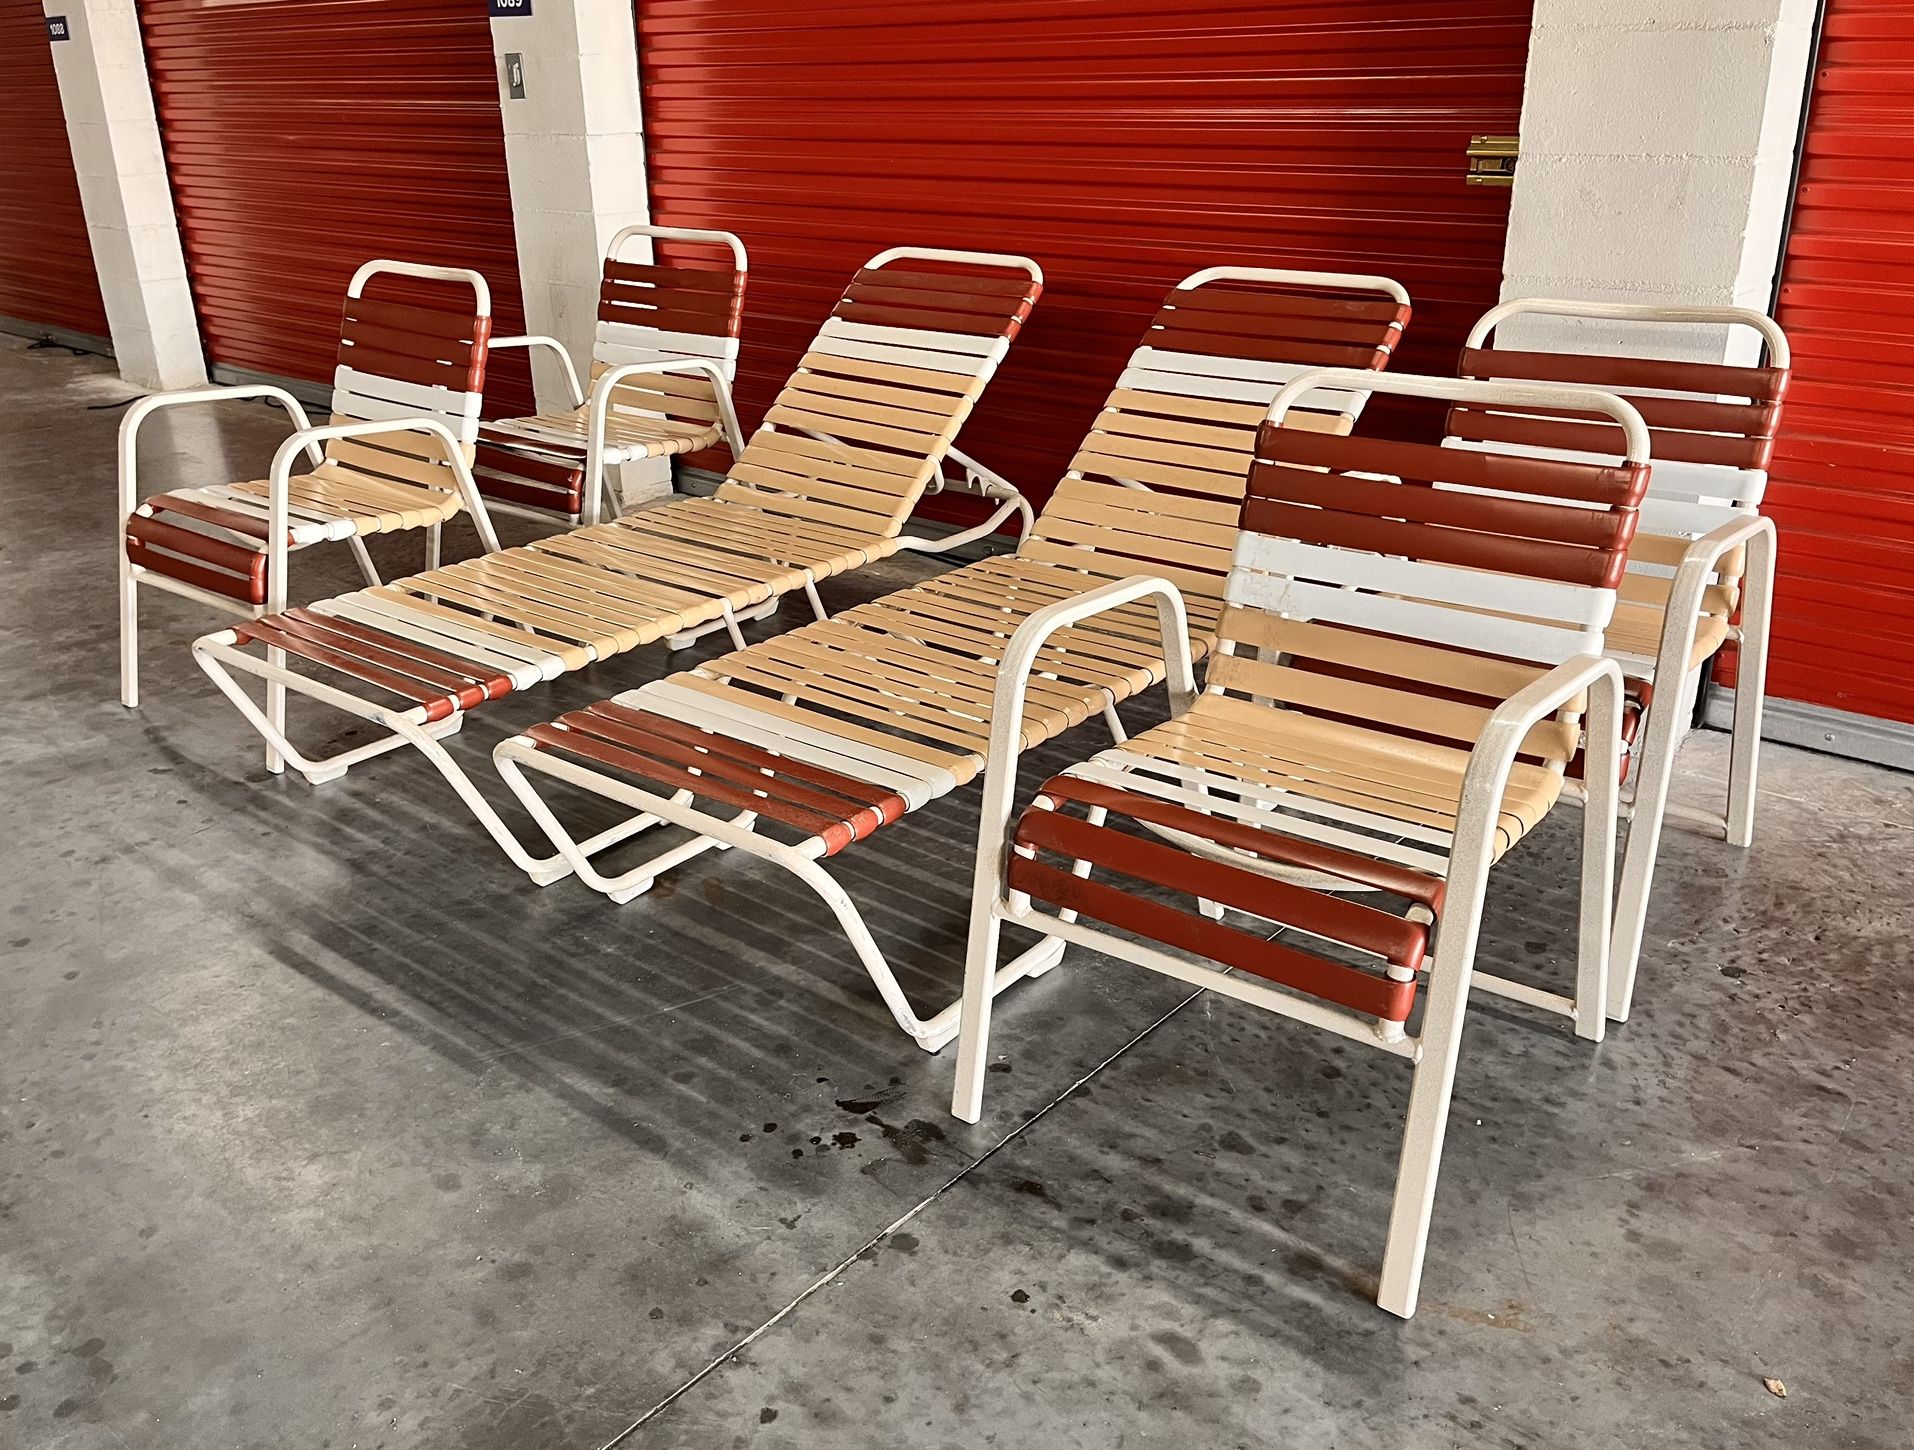 $180 For (6) Piece Retro Aluminum Patio Chaise Lounge and Chair Set 